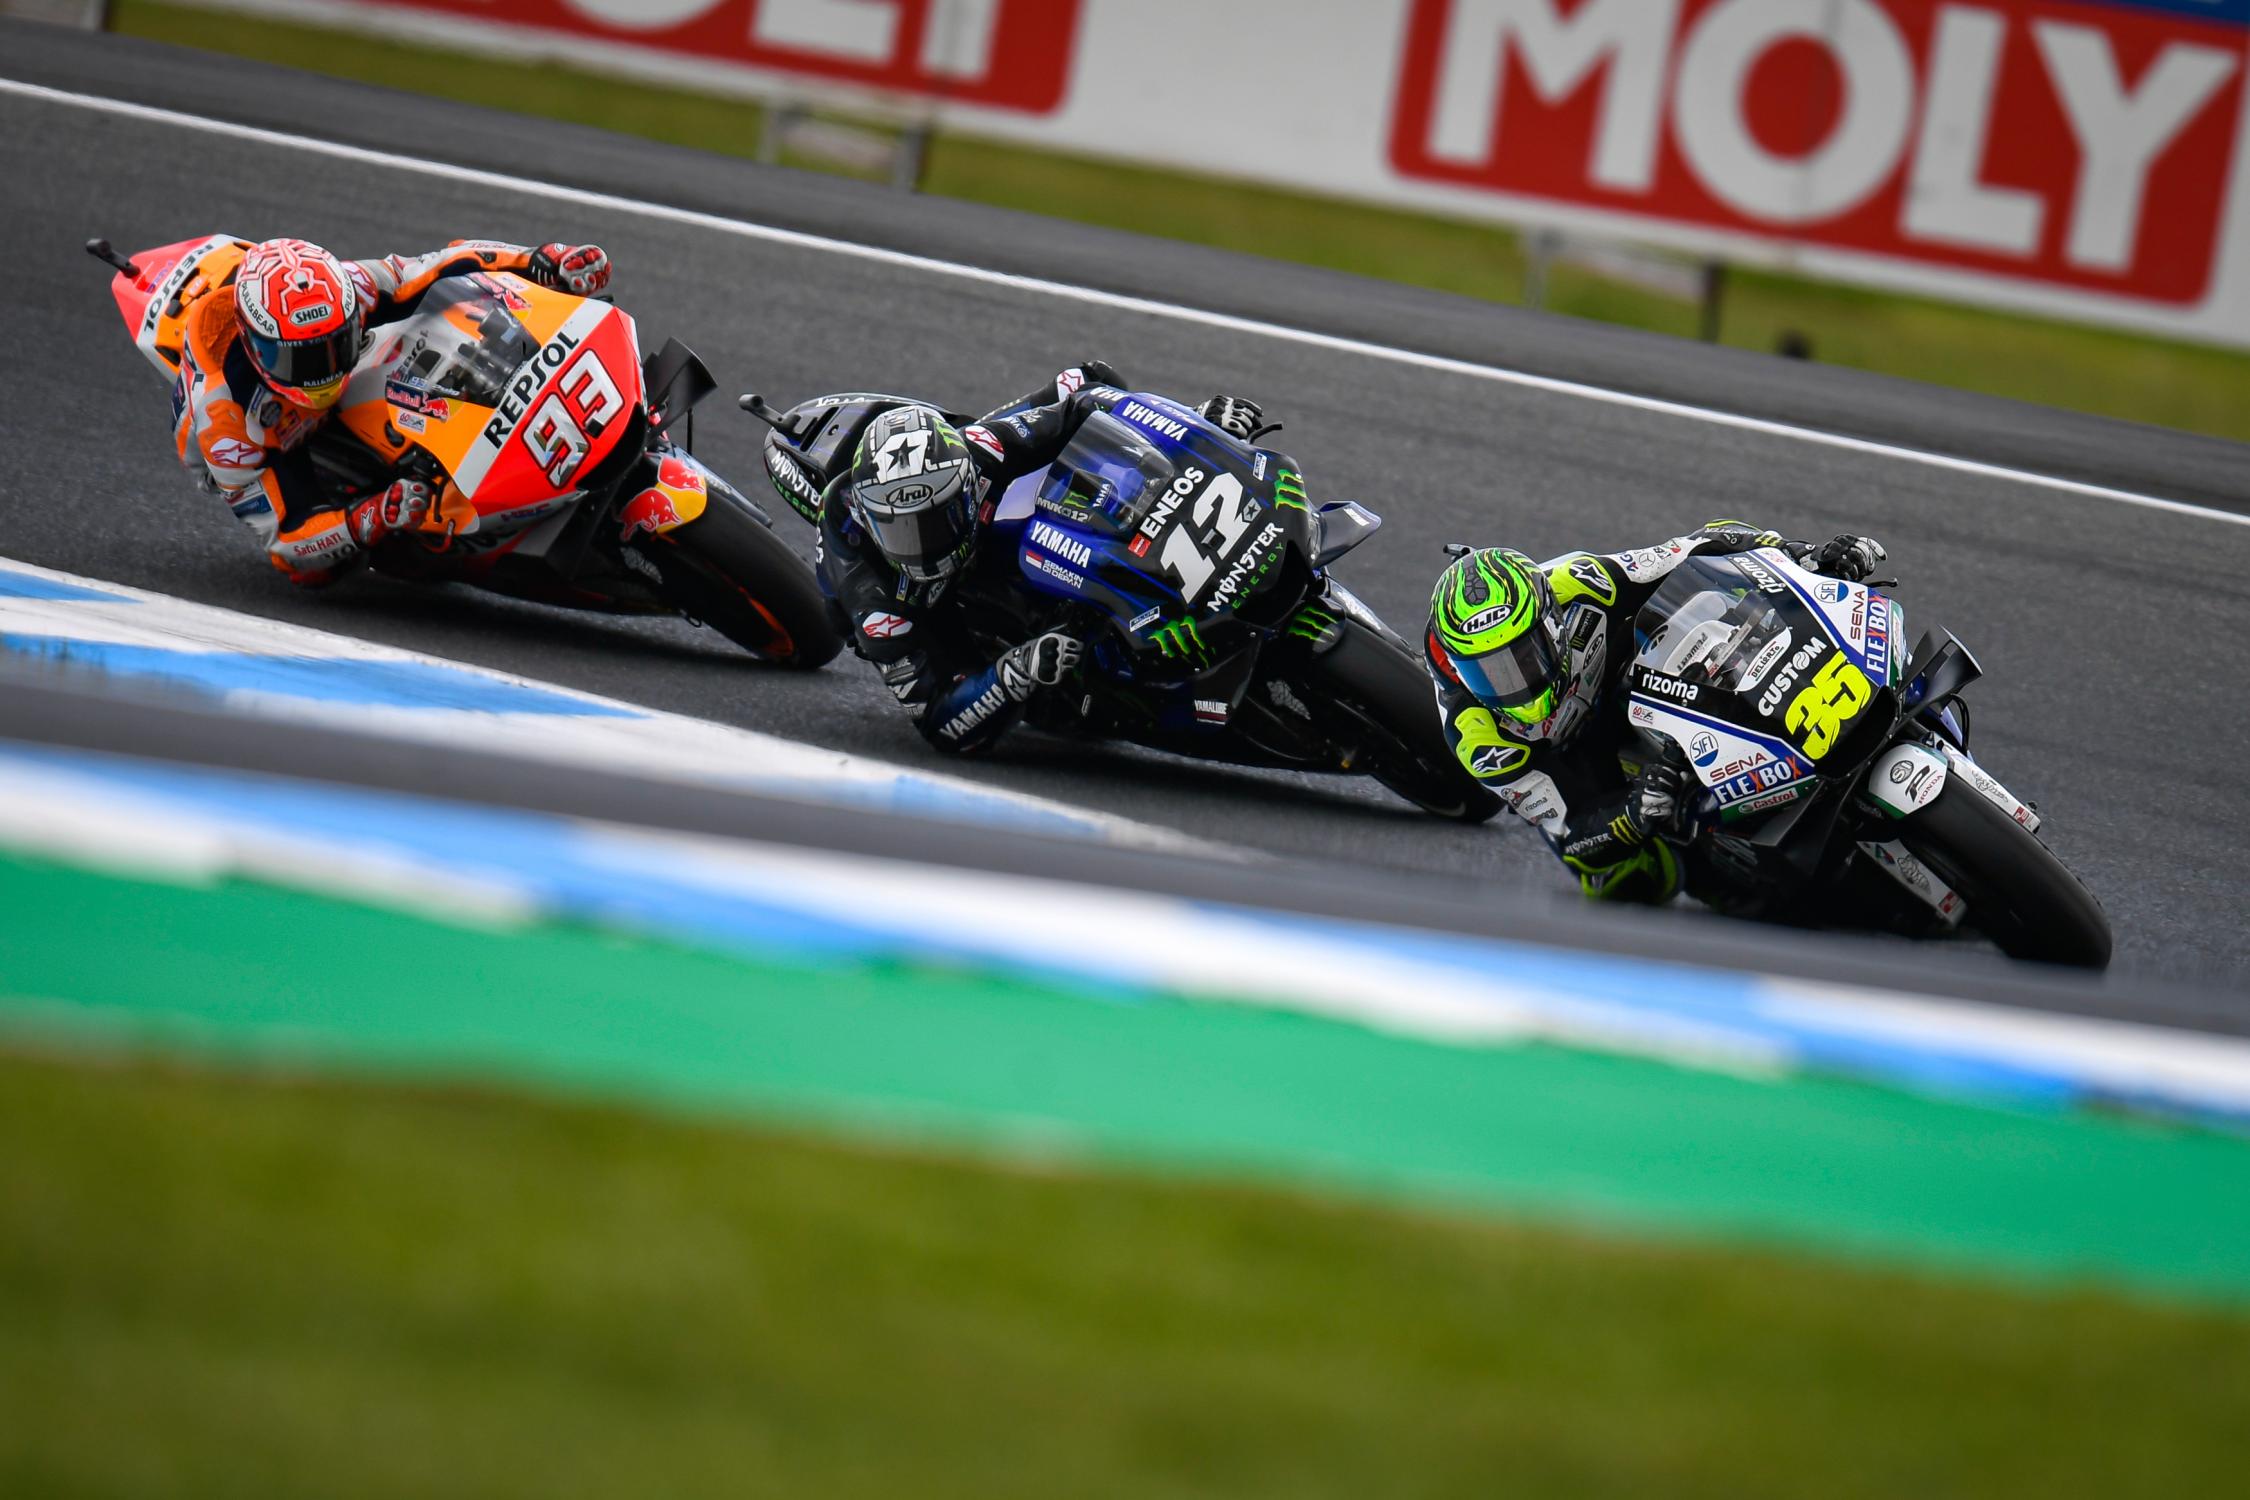 CRUTCHLOW BACK ON THE PODIUM AT PHILLIP ISLAND